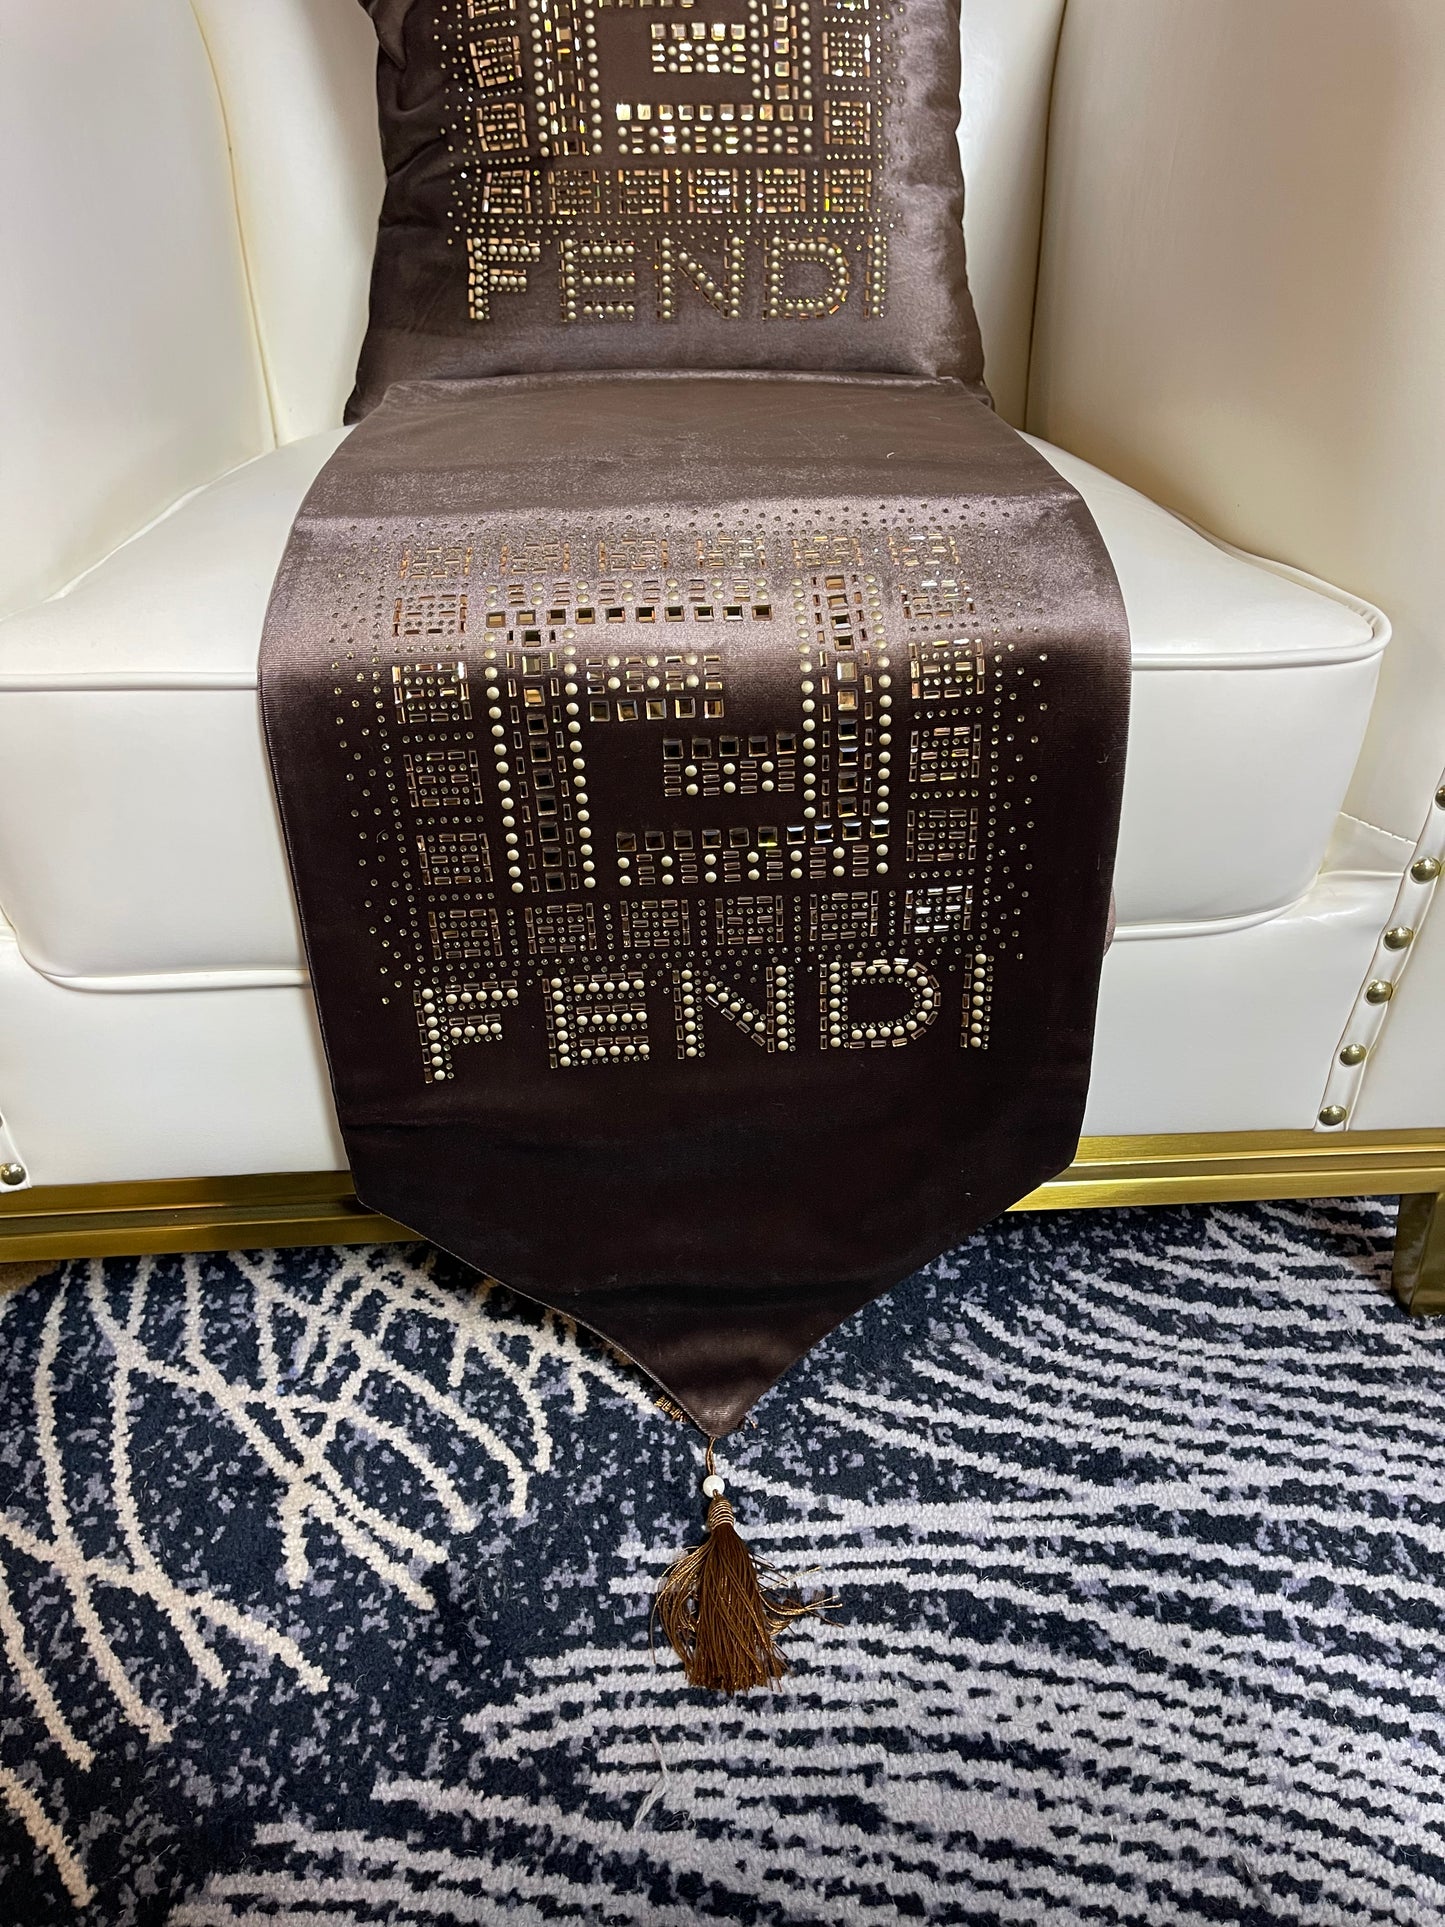 Brown and Gold  Embroidered Fendi Throw Pillow